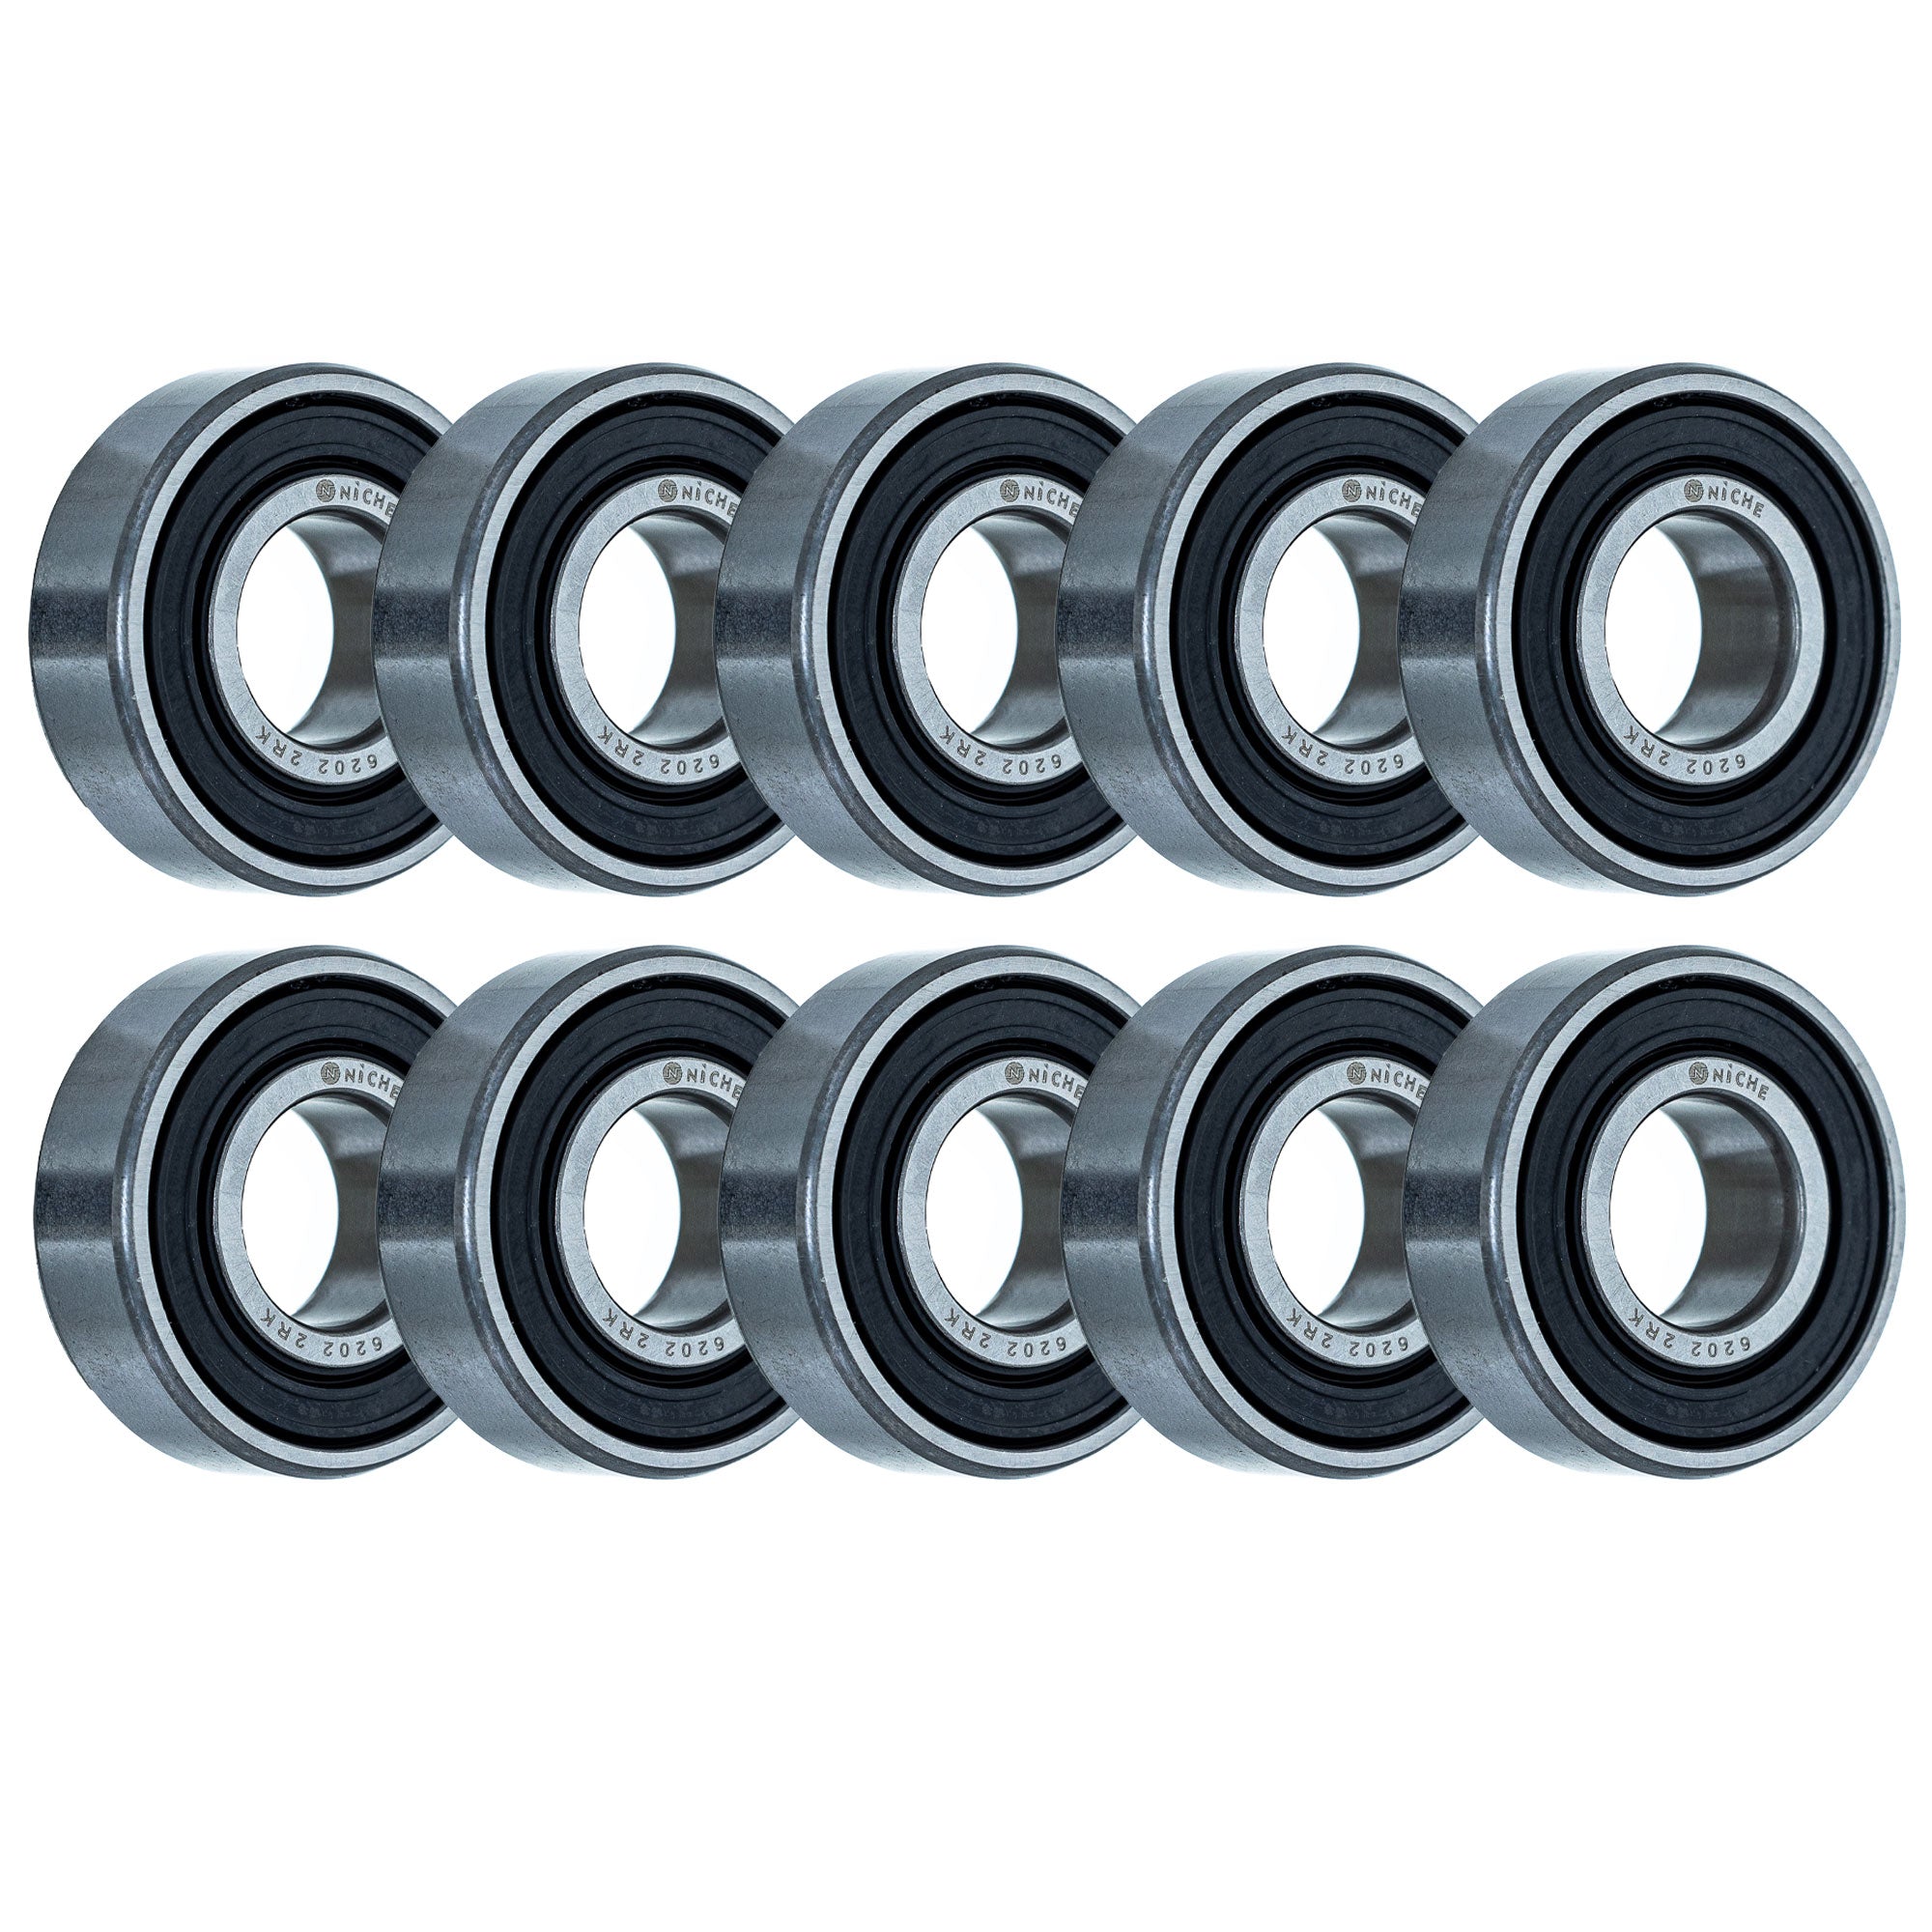 Electric Grade, Single Row, Deep Groove, Ball Bearing Pack of 10 10-Pack for zOTHER TTR250 NICHE 519-CBB2298R